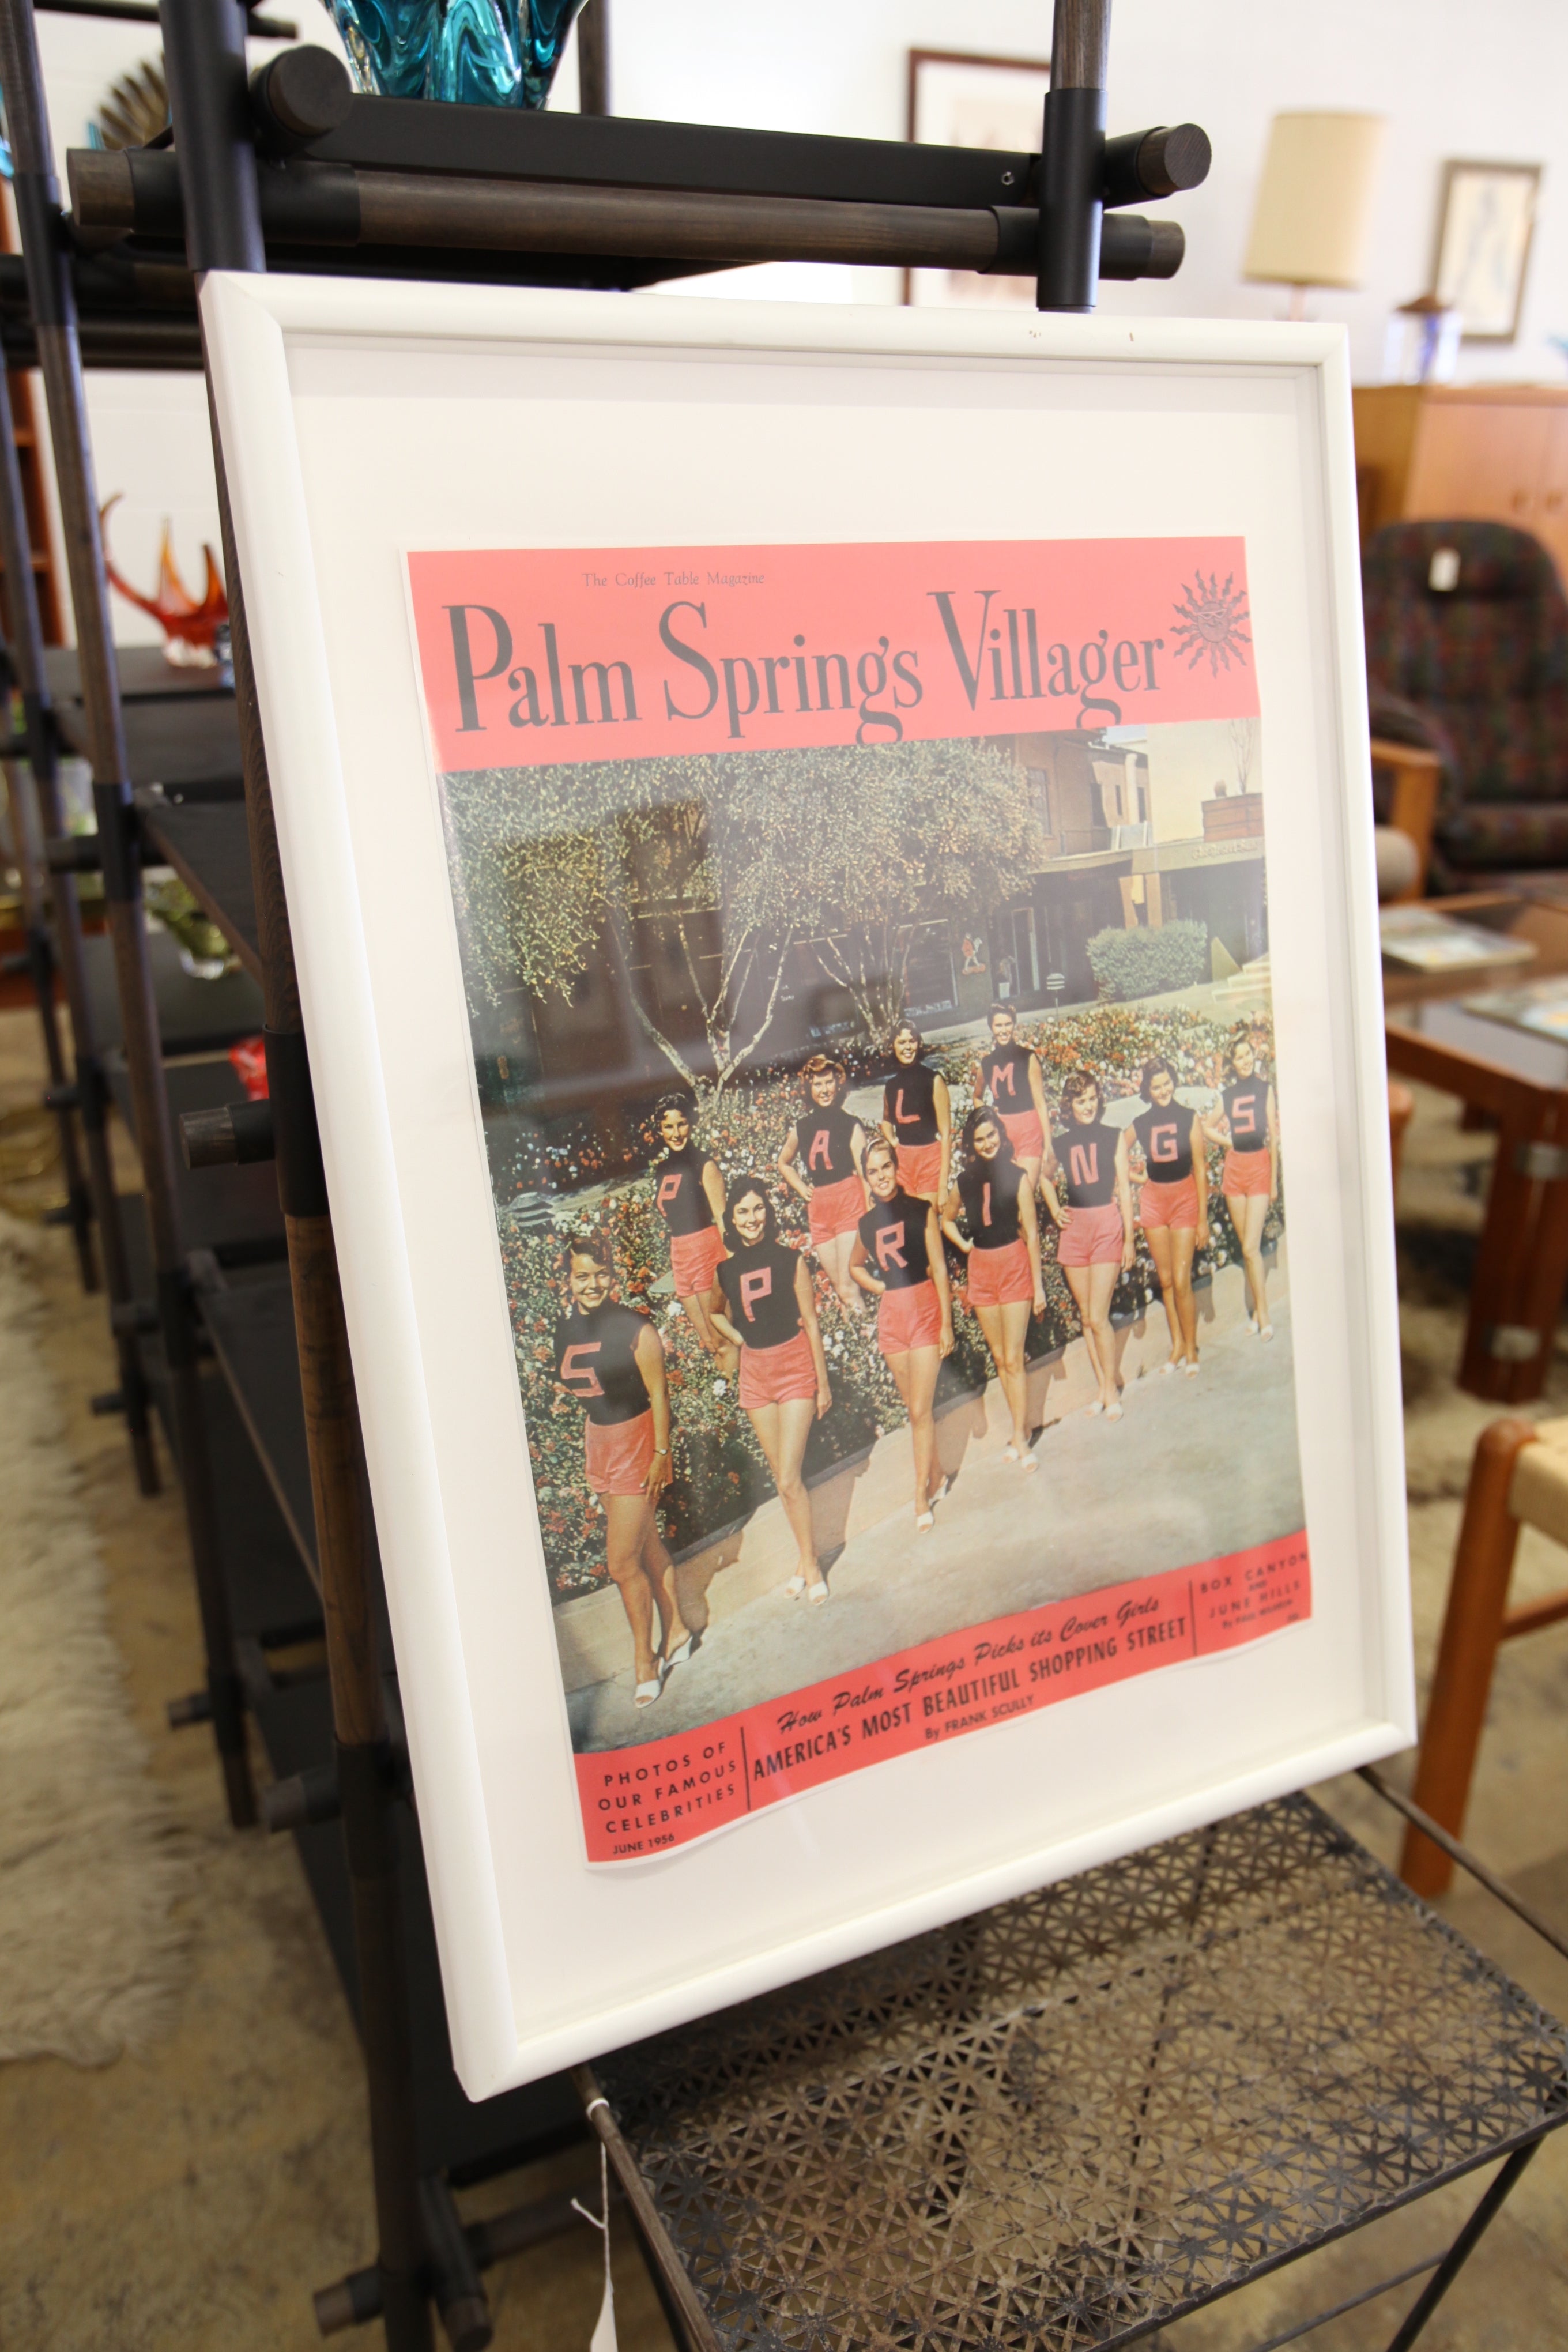 Palm Springs Villager Framed Print (20.5"W x 28.5"H x 1.5" thick)